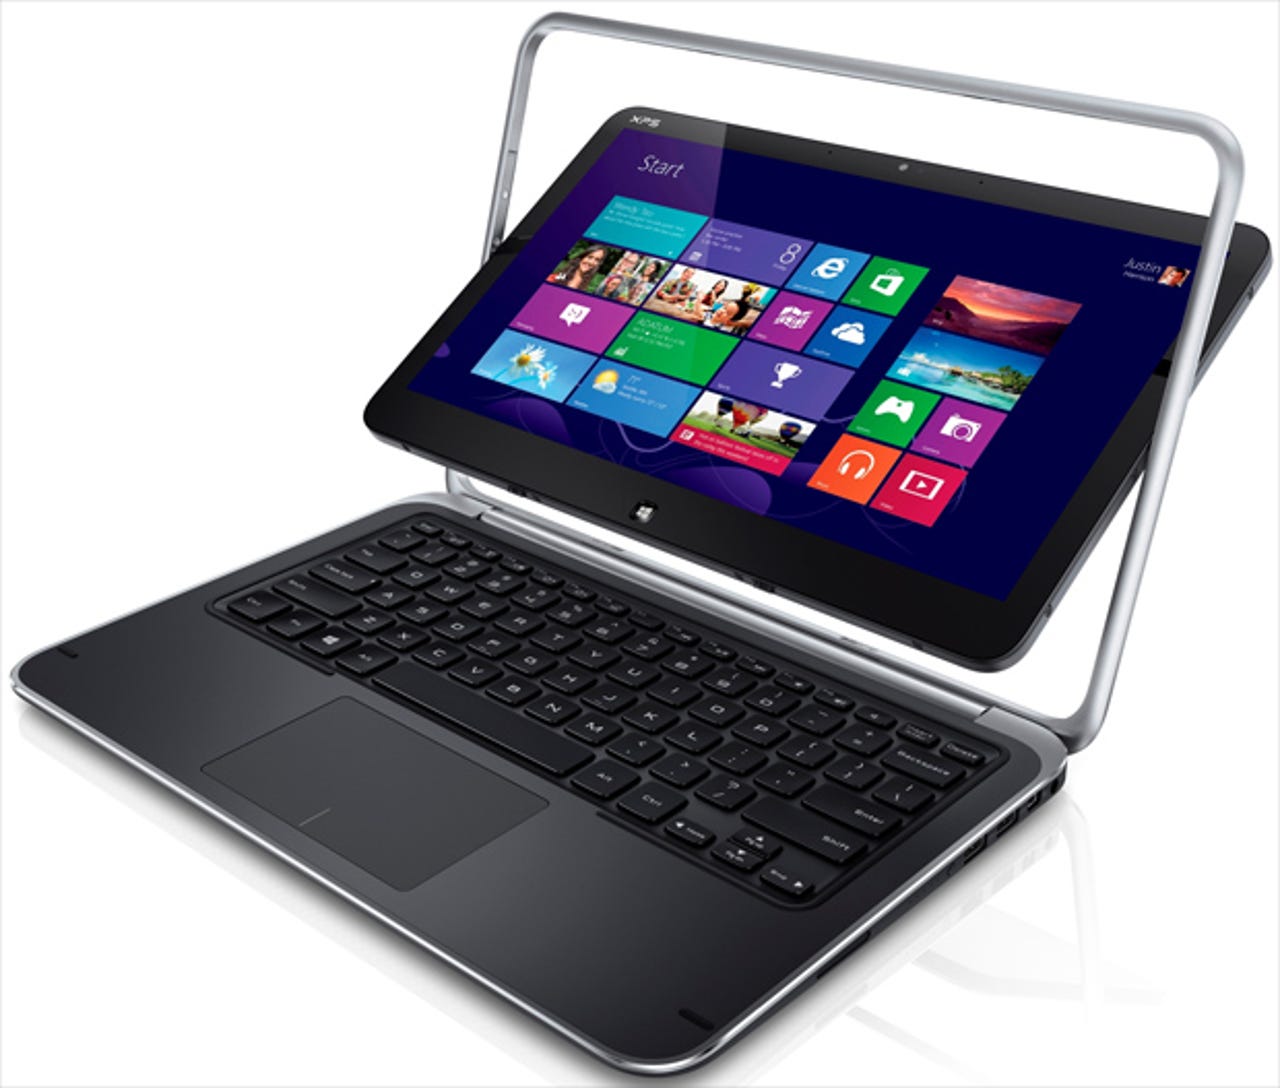 Dell XPS Duo 12 convertible Ultrabook